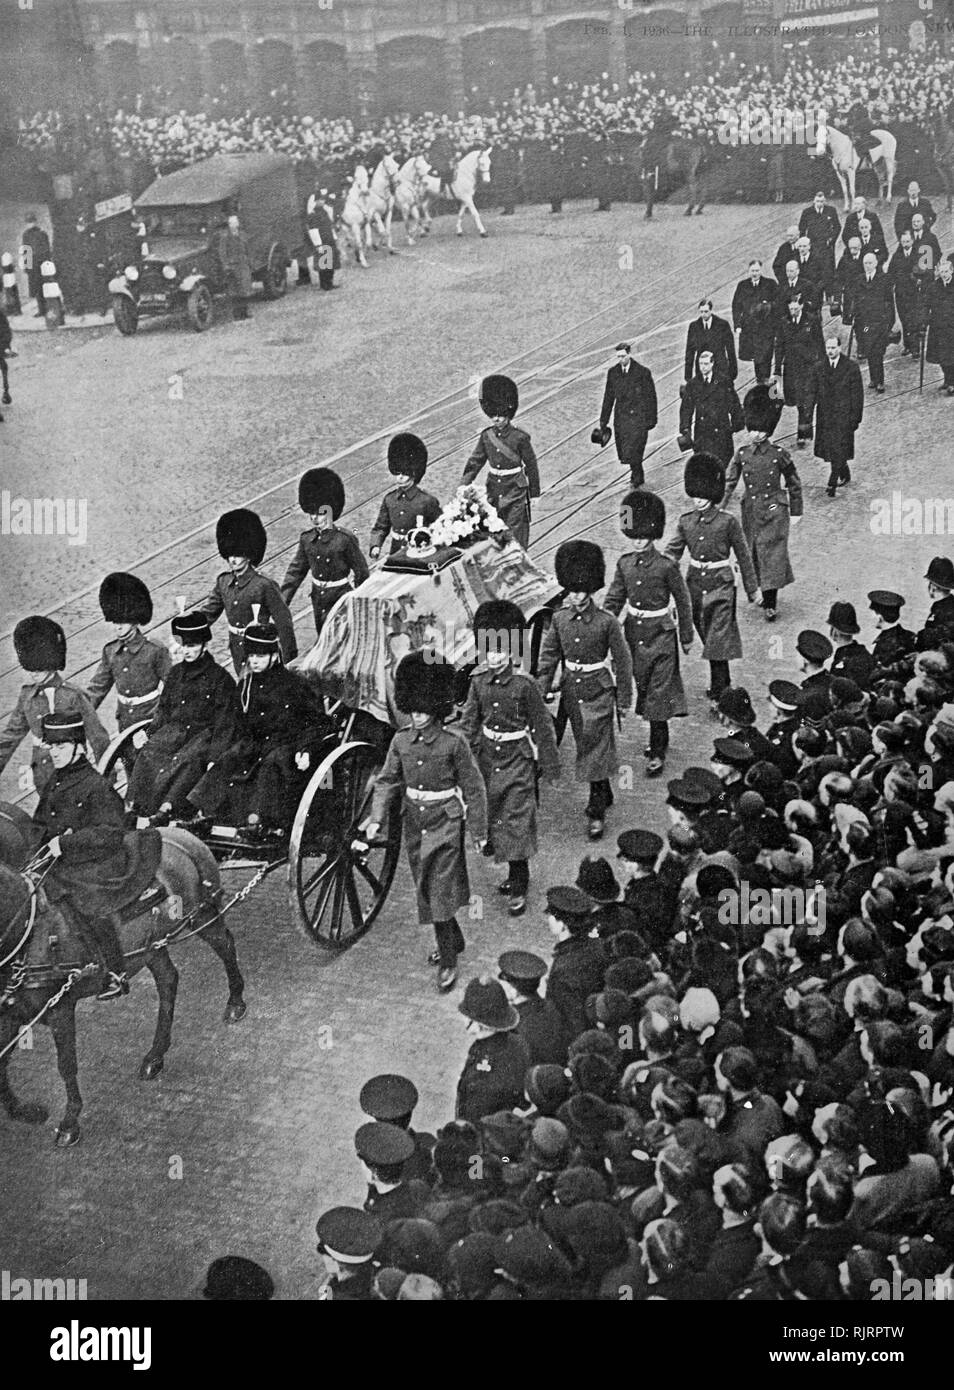 Funeral of King George V (1936); King of the United Kingdom and the British Dominions, and Emperor of India, from 6 May 1910 until his death in 1936. the four sons of the late king (King Edward VIII, the Duke of York, the Duke of Gloucester and the Duke of Kent) take part in the state funeral. Stock Photo